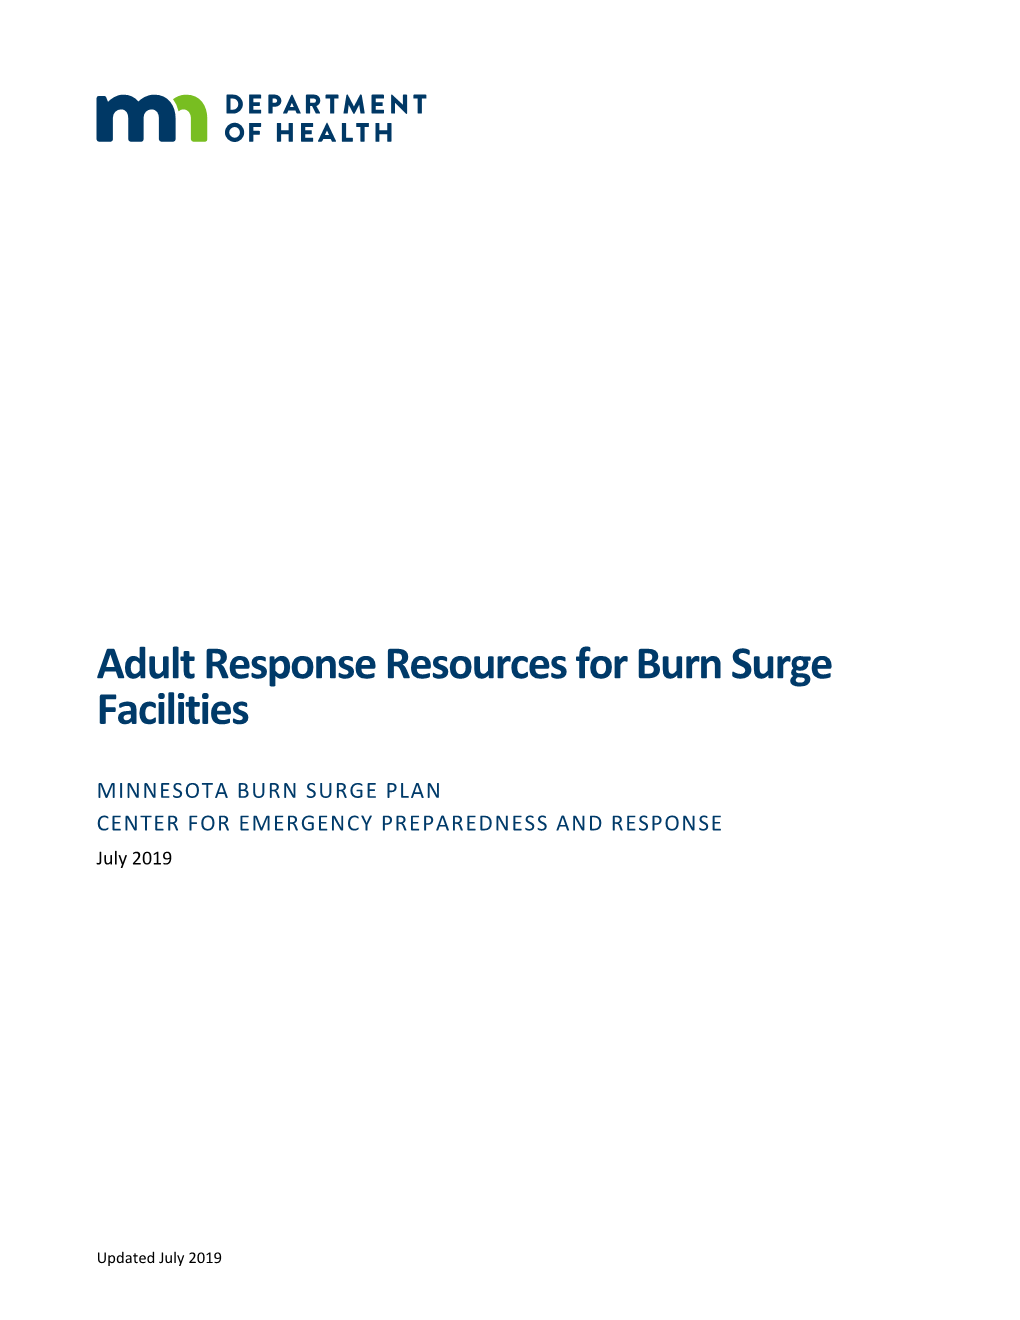 Adult Response Resources for Burn Surge Facilities